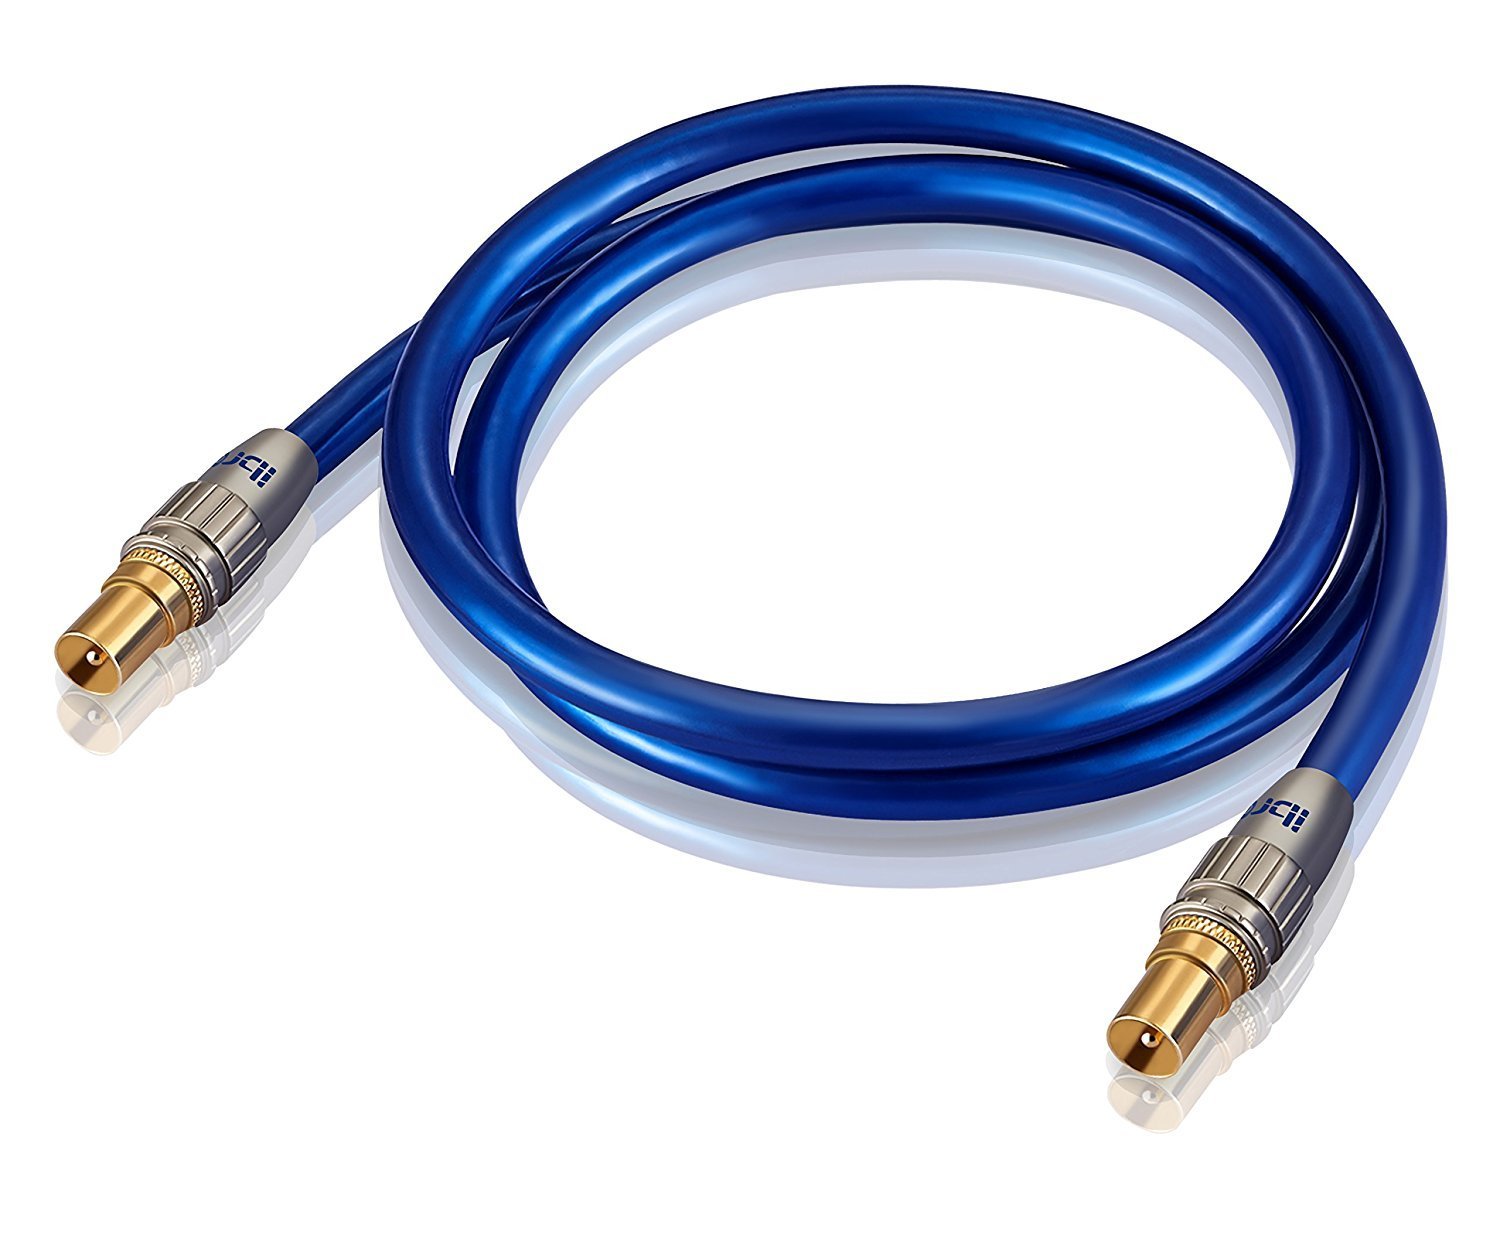 20M HDTV Antenna Cable | TV Aerial Cable | Premium Freeview Coaxial Cable | Connectors: Coax Male to Coax Male | For UHF / RF TVs, VCRs, DVD players, DVRs, cable boxes and satellite | IBRA Blue Gold